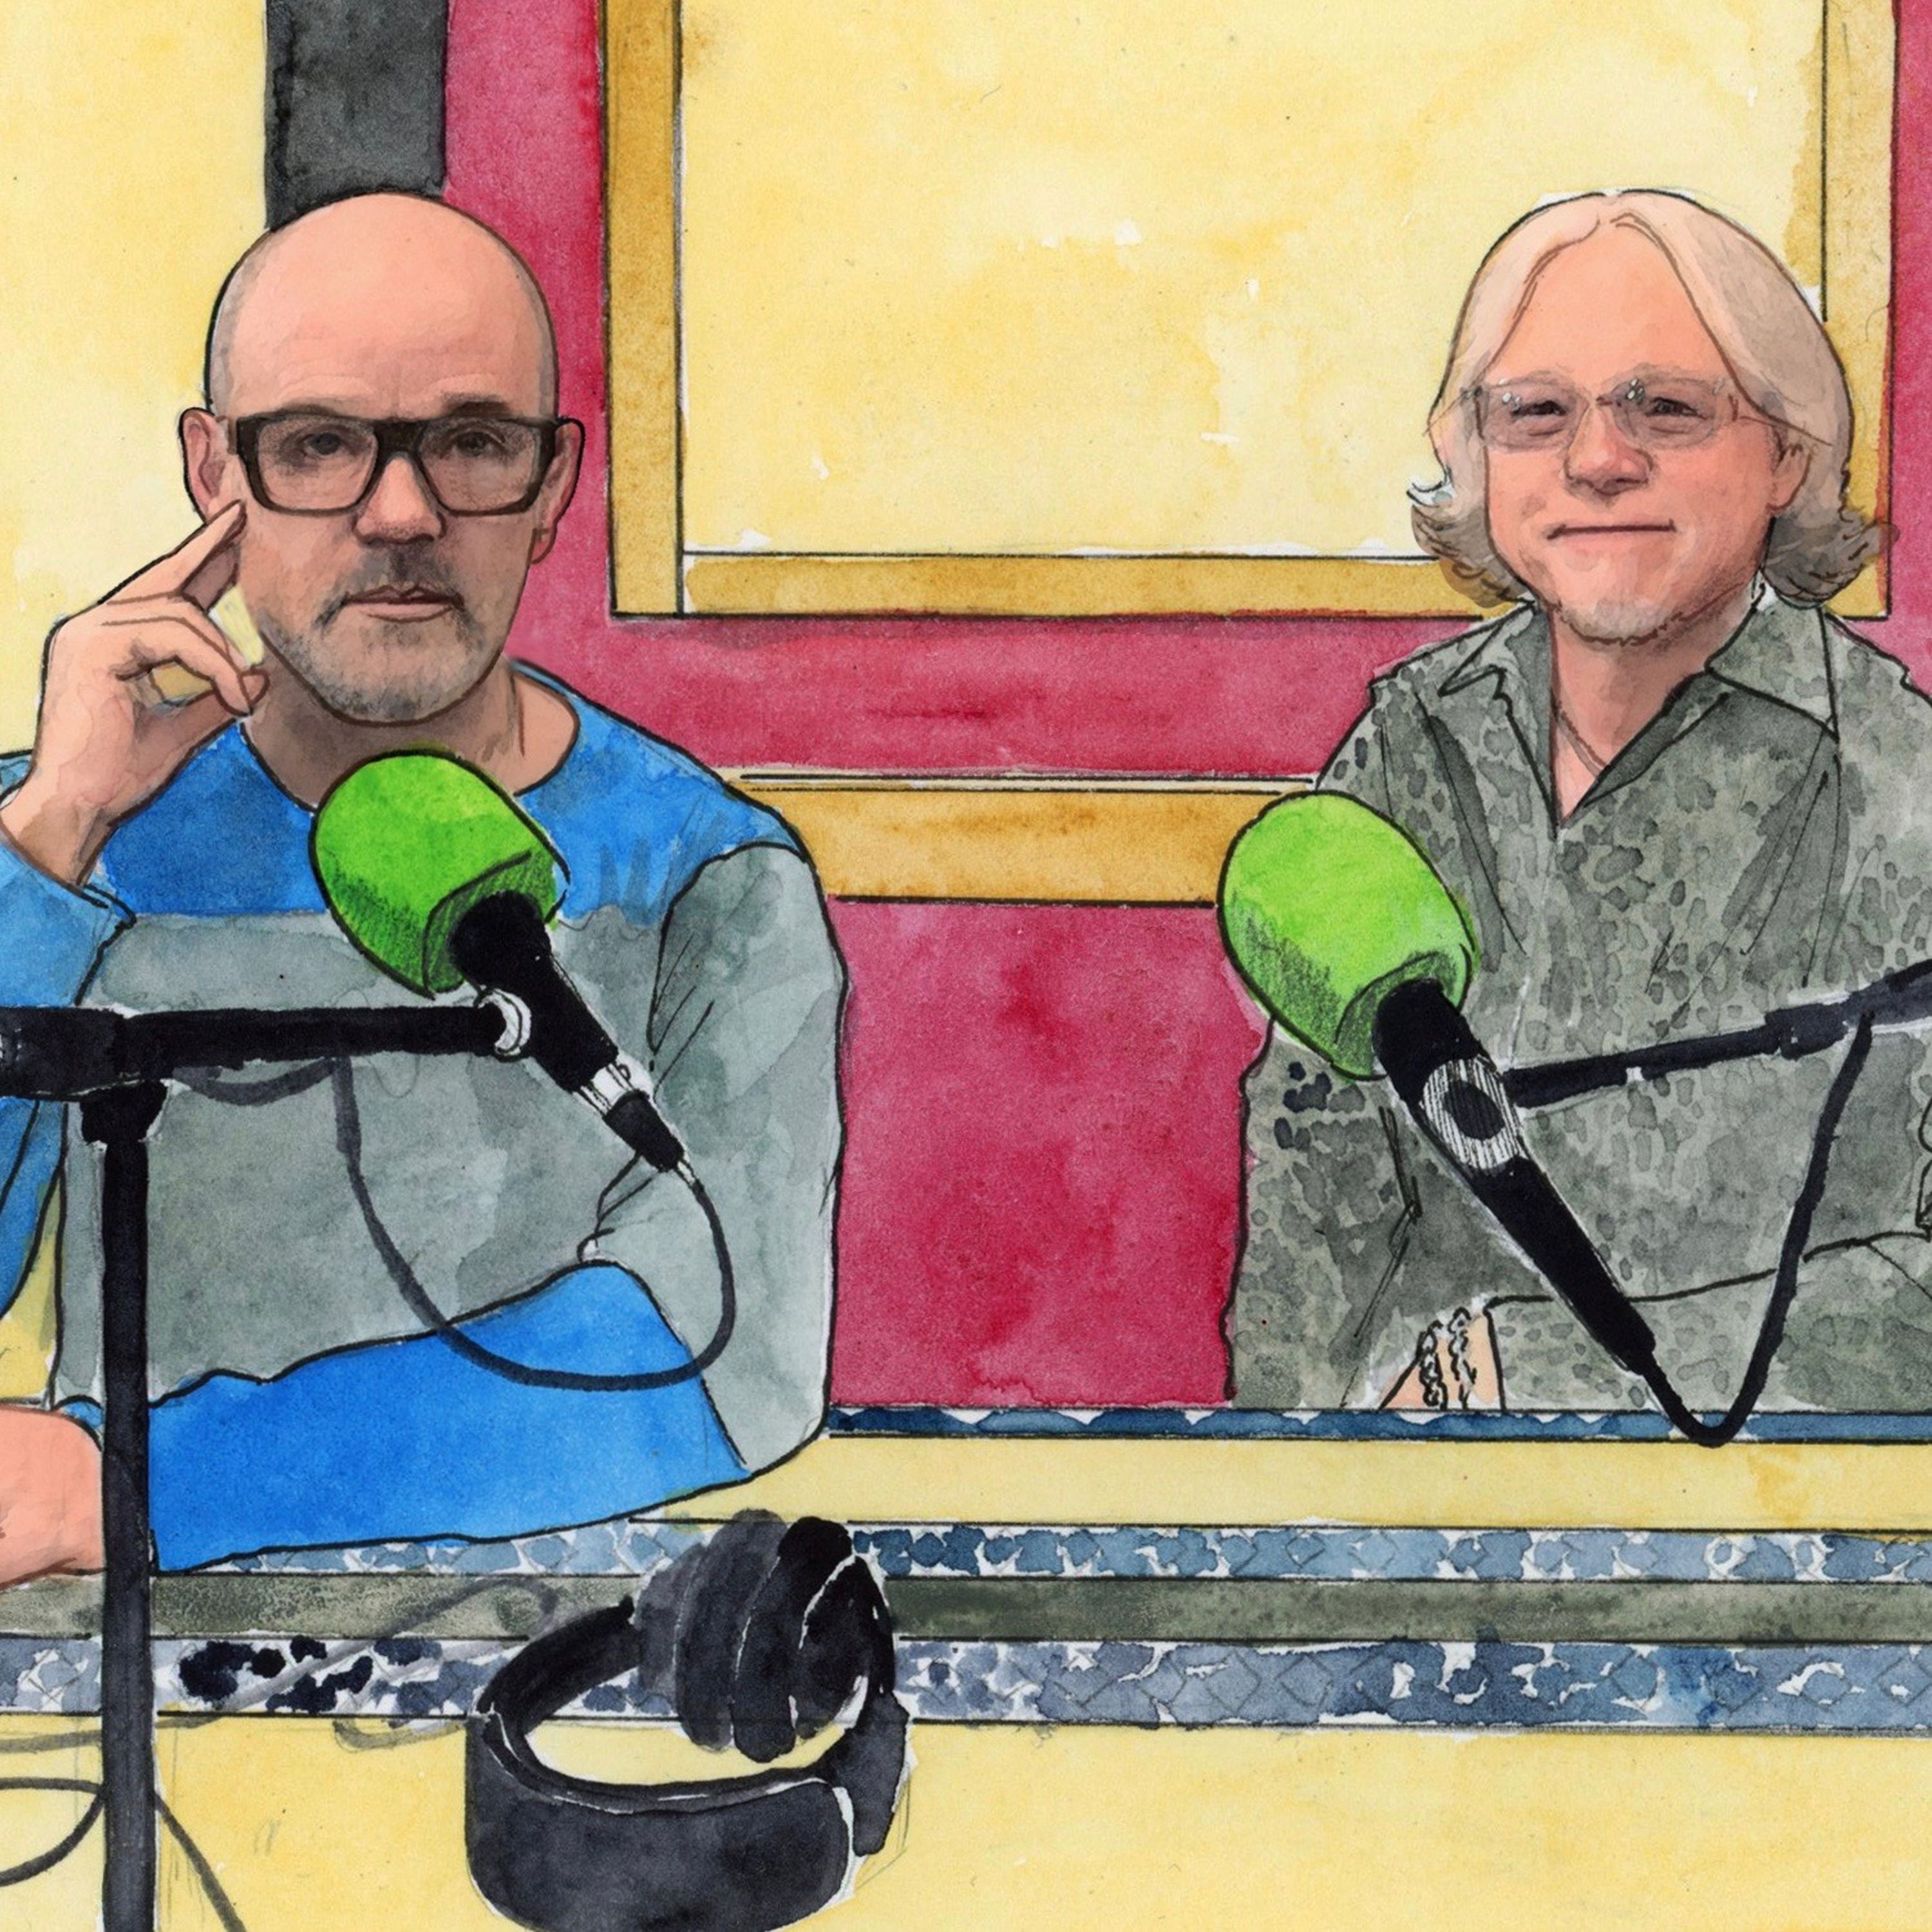 Ep. 89: Michael Stipe and Mike Mills of R.E.M.